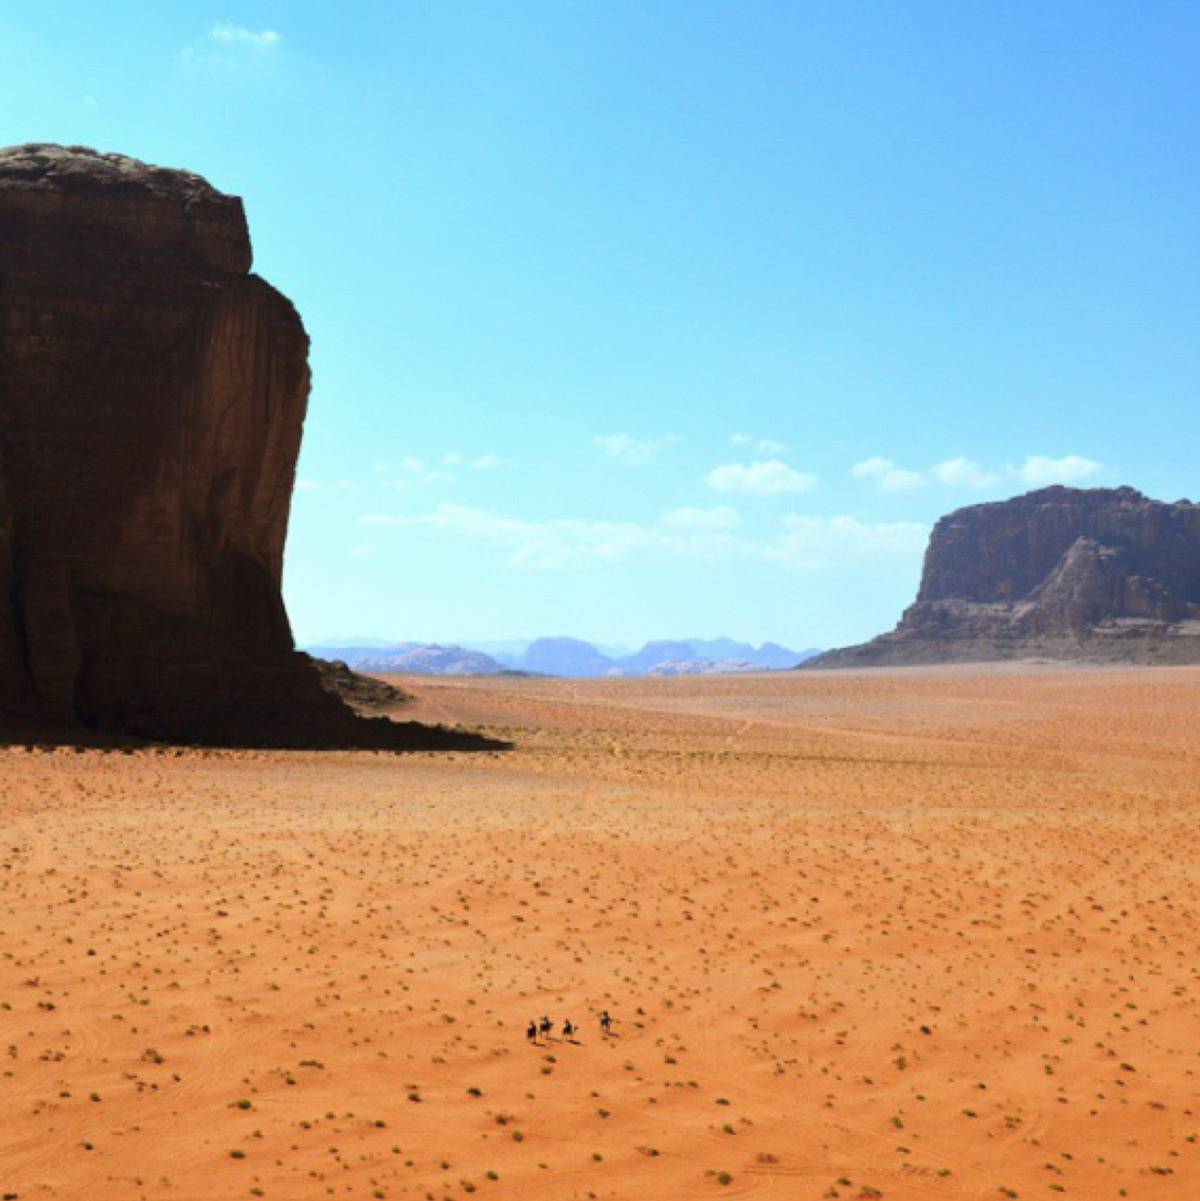 <p>Here is a picture of some people traveling in the Jordanian desert.</p> <p>If you squint closely, you'll be able to see the four people riding their horses in the sand. </p>